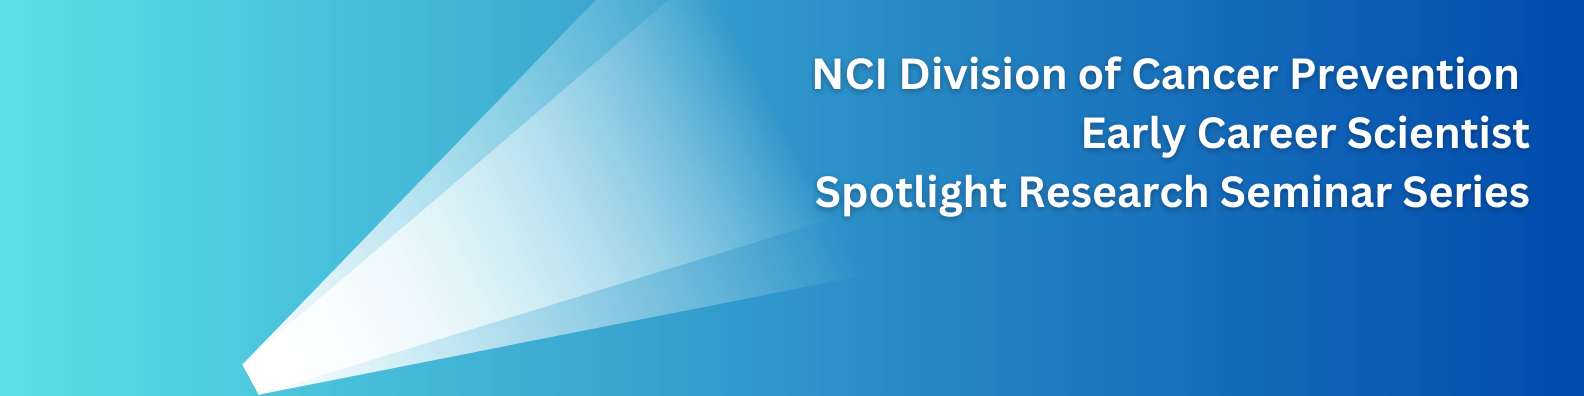 NCI Division of Cancer Prevention Early Career Scientist Spotlight Research Seminar Series